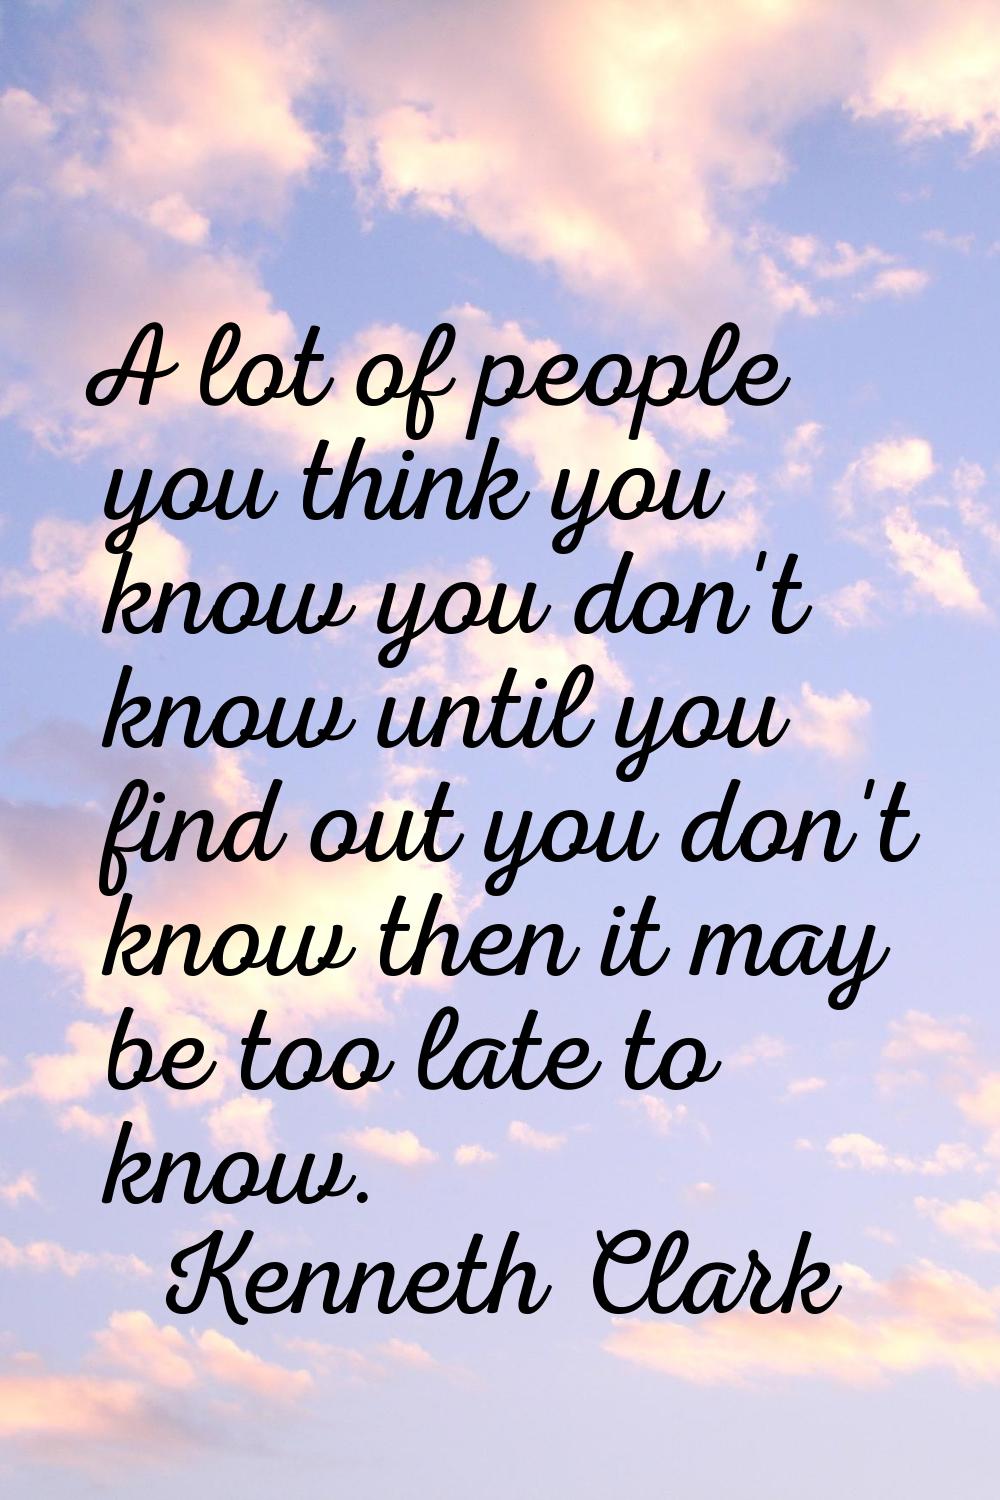 A lot of people you think you know you don't know until you find out you don't know then it may be 